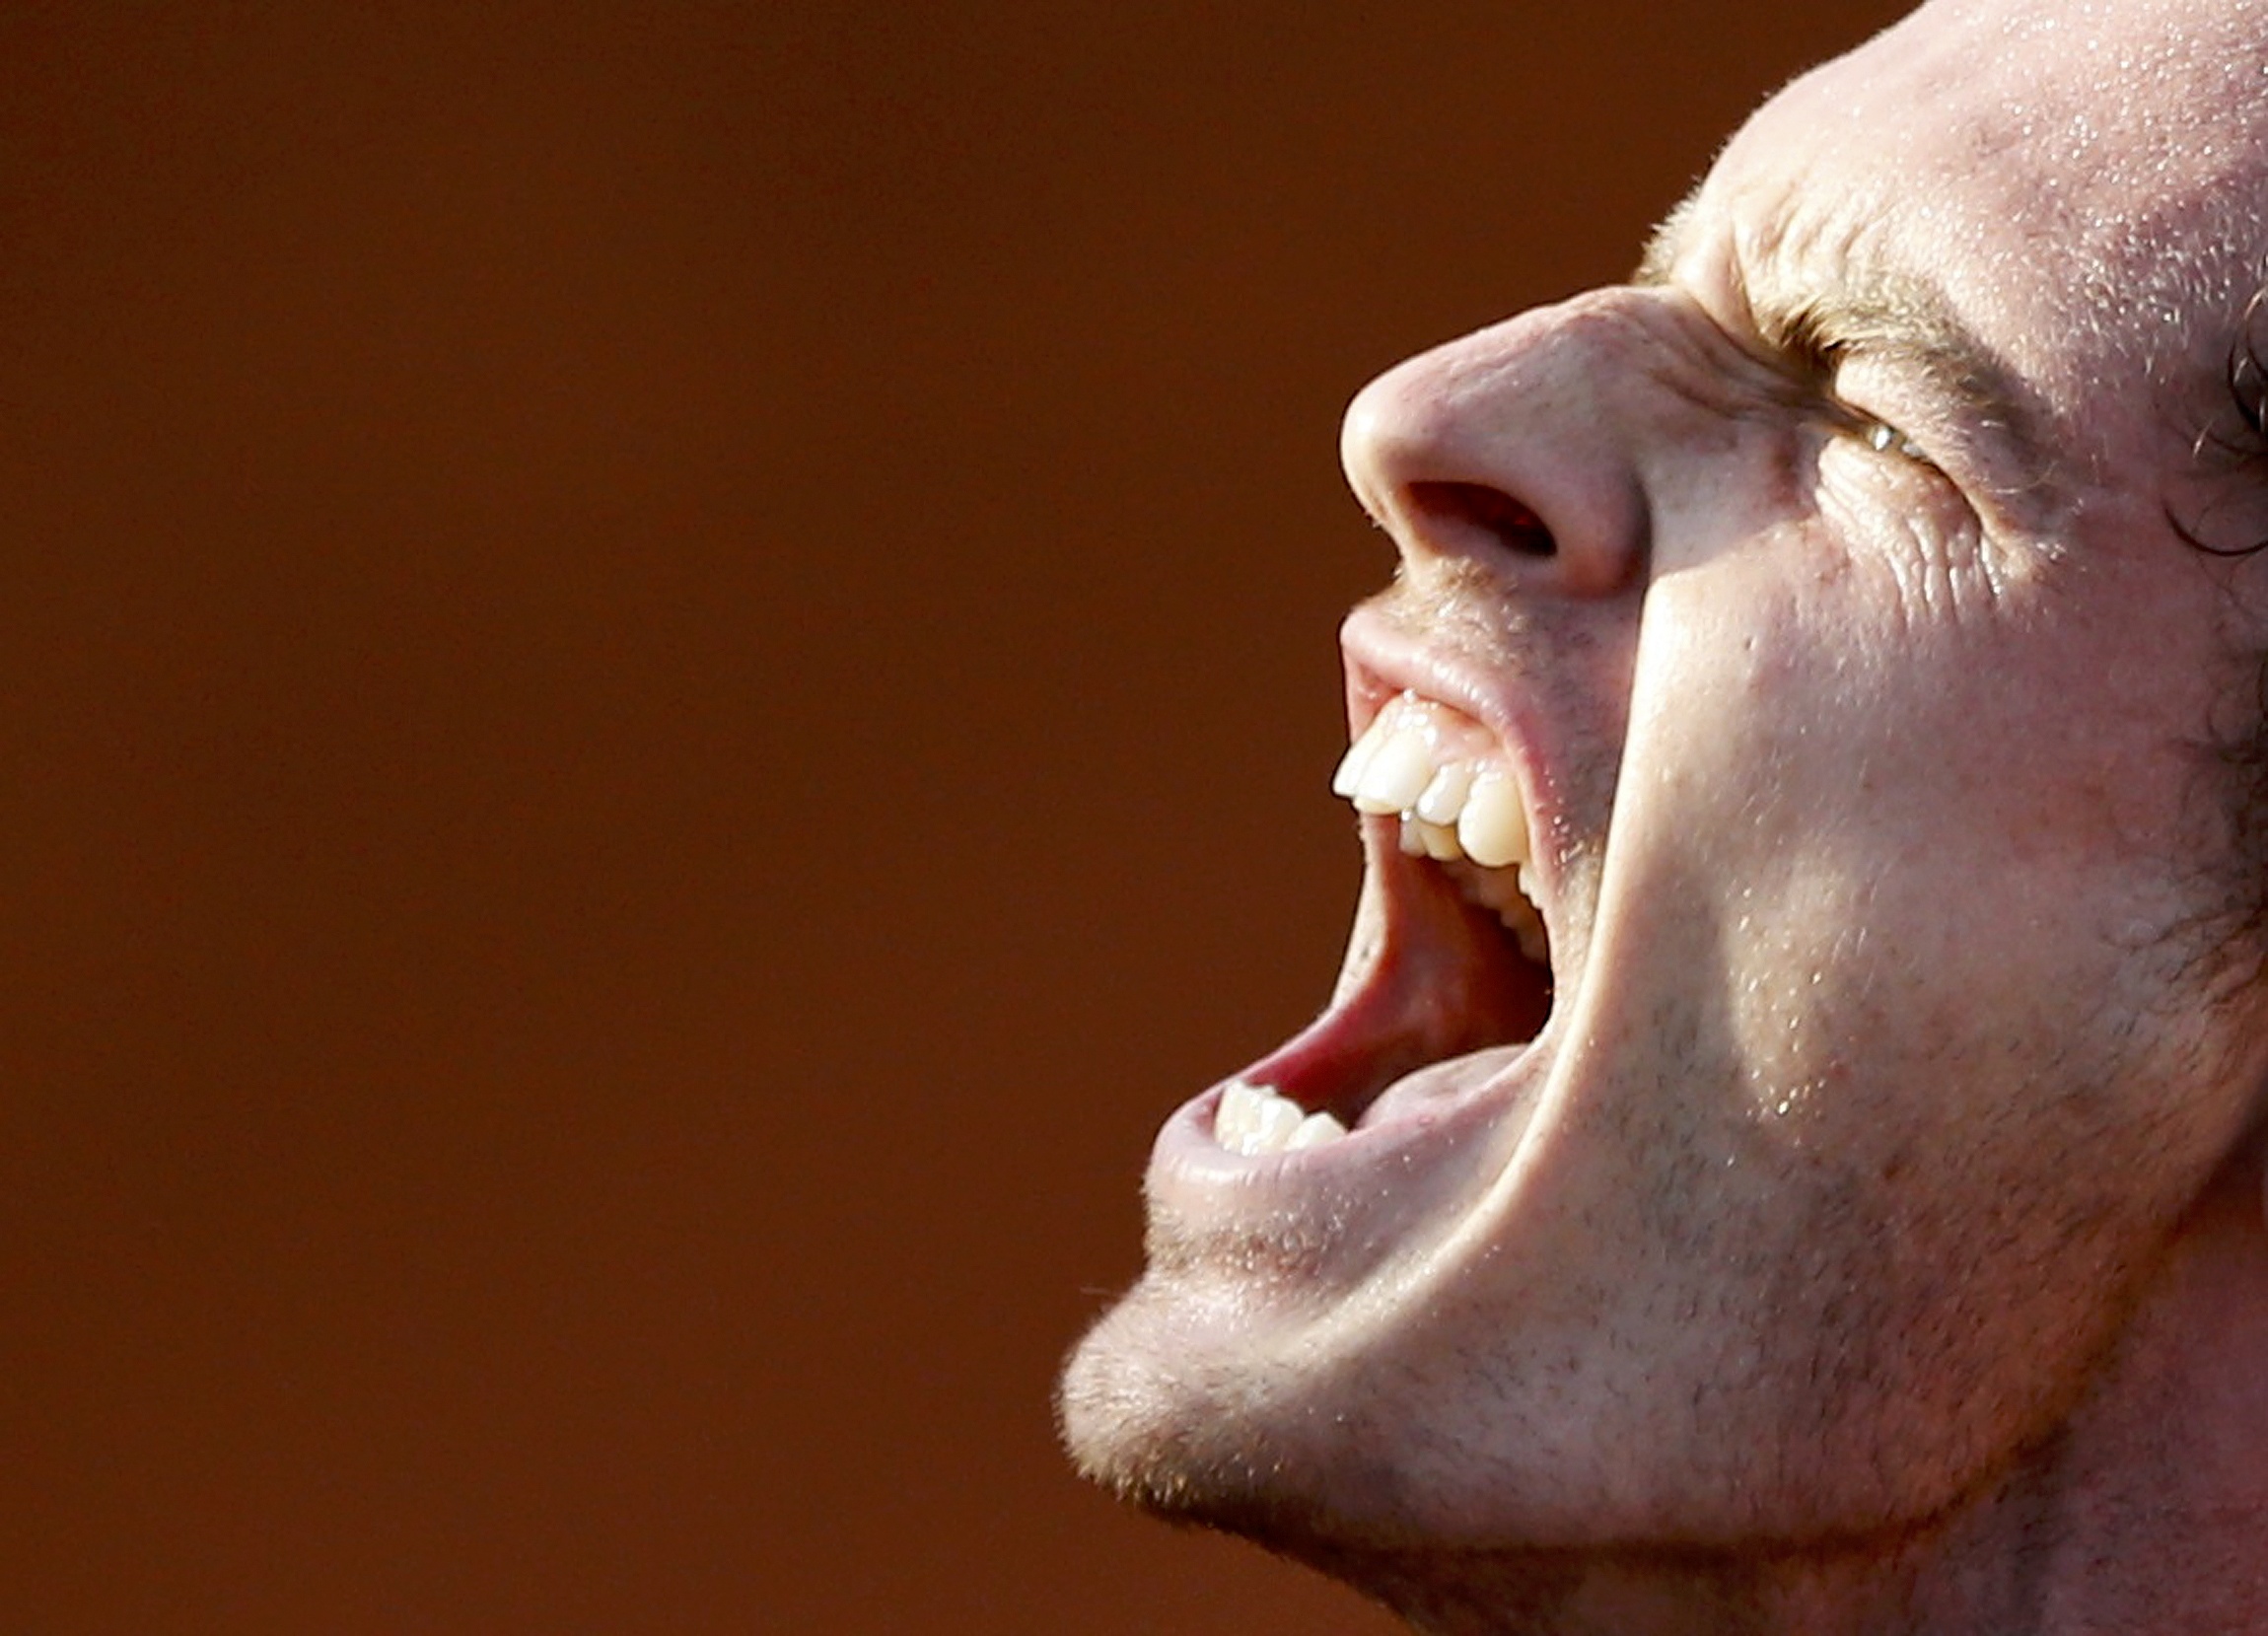 Andy Murray lets it all out during his four-set victory over David Ferrer in the quarter-finals at Roland Garros. Photo: Reuters